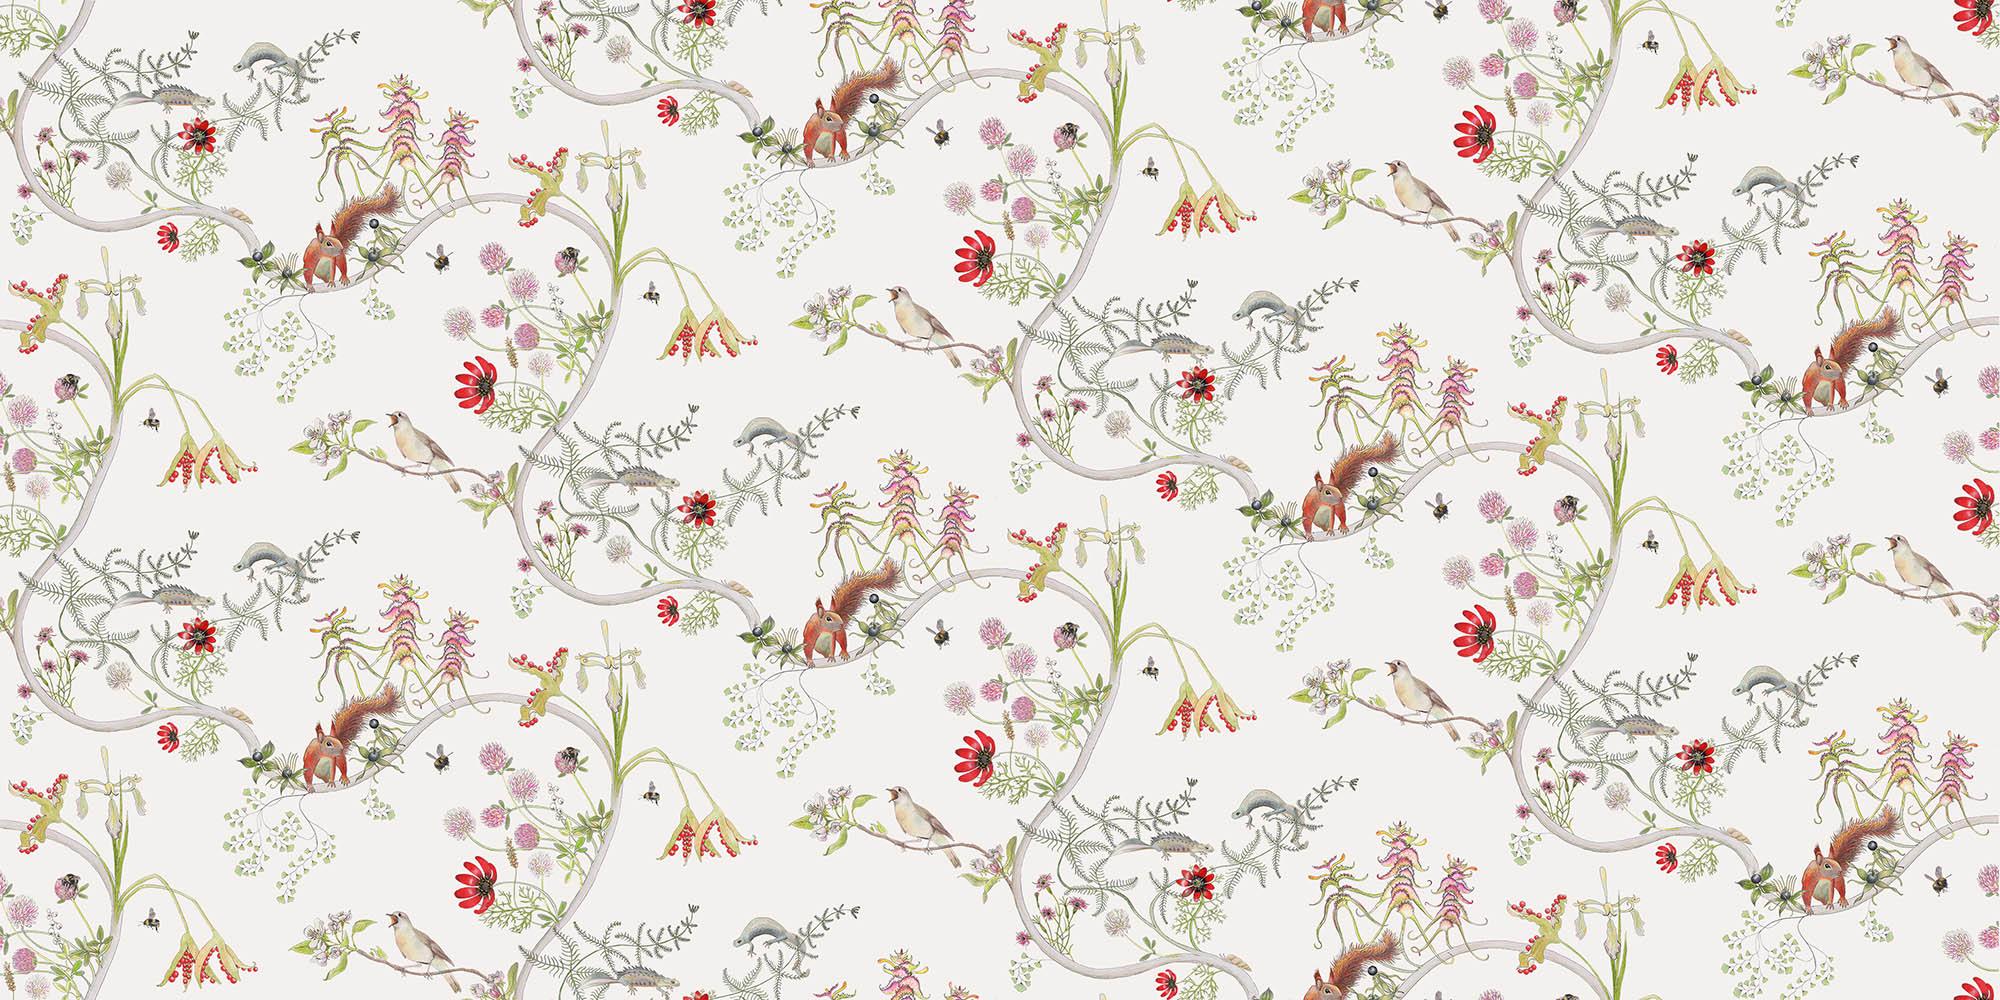 Collection: Mercia Vines
Product Code: 28A
Color: Cream
Roll dimensions: 70cm x 10m (27.6in x 10.9yards)
Area: 7sq.m (8.4 sq.yards)
Pattern repeat: 70cm (27.6in) Three Quarter Drop
Wallpaper: Non-woven 147gsm Uncoated
Fire rating: Fire certified for